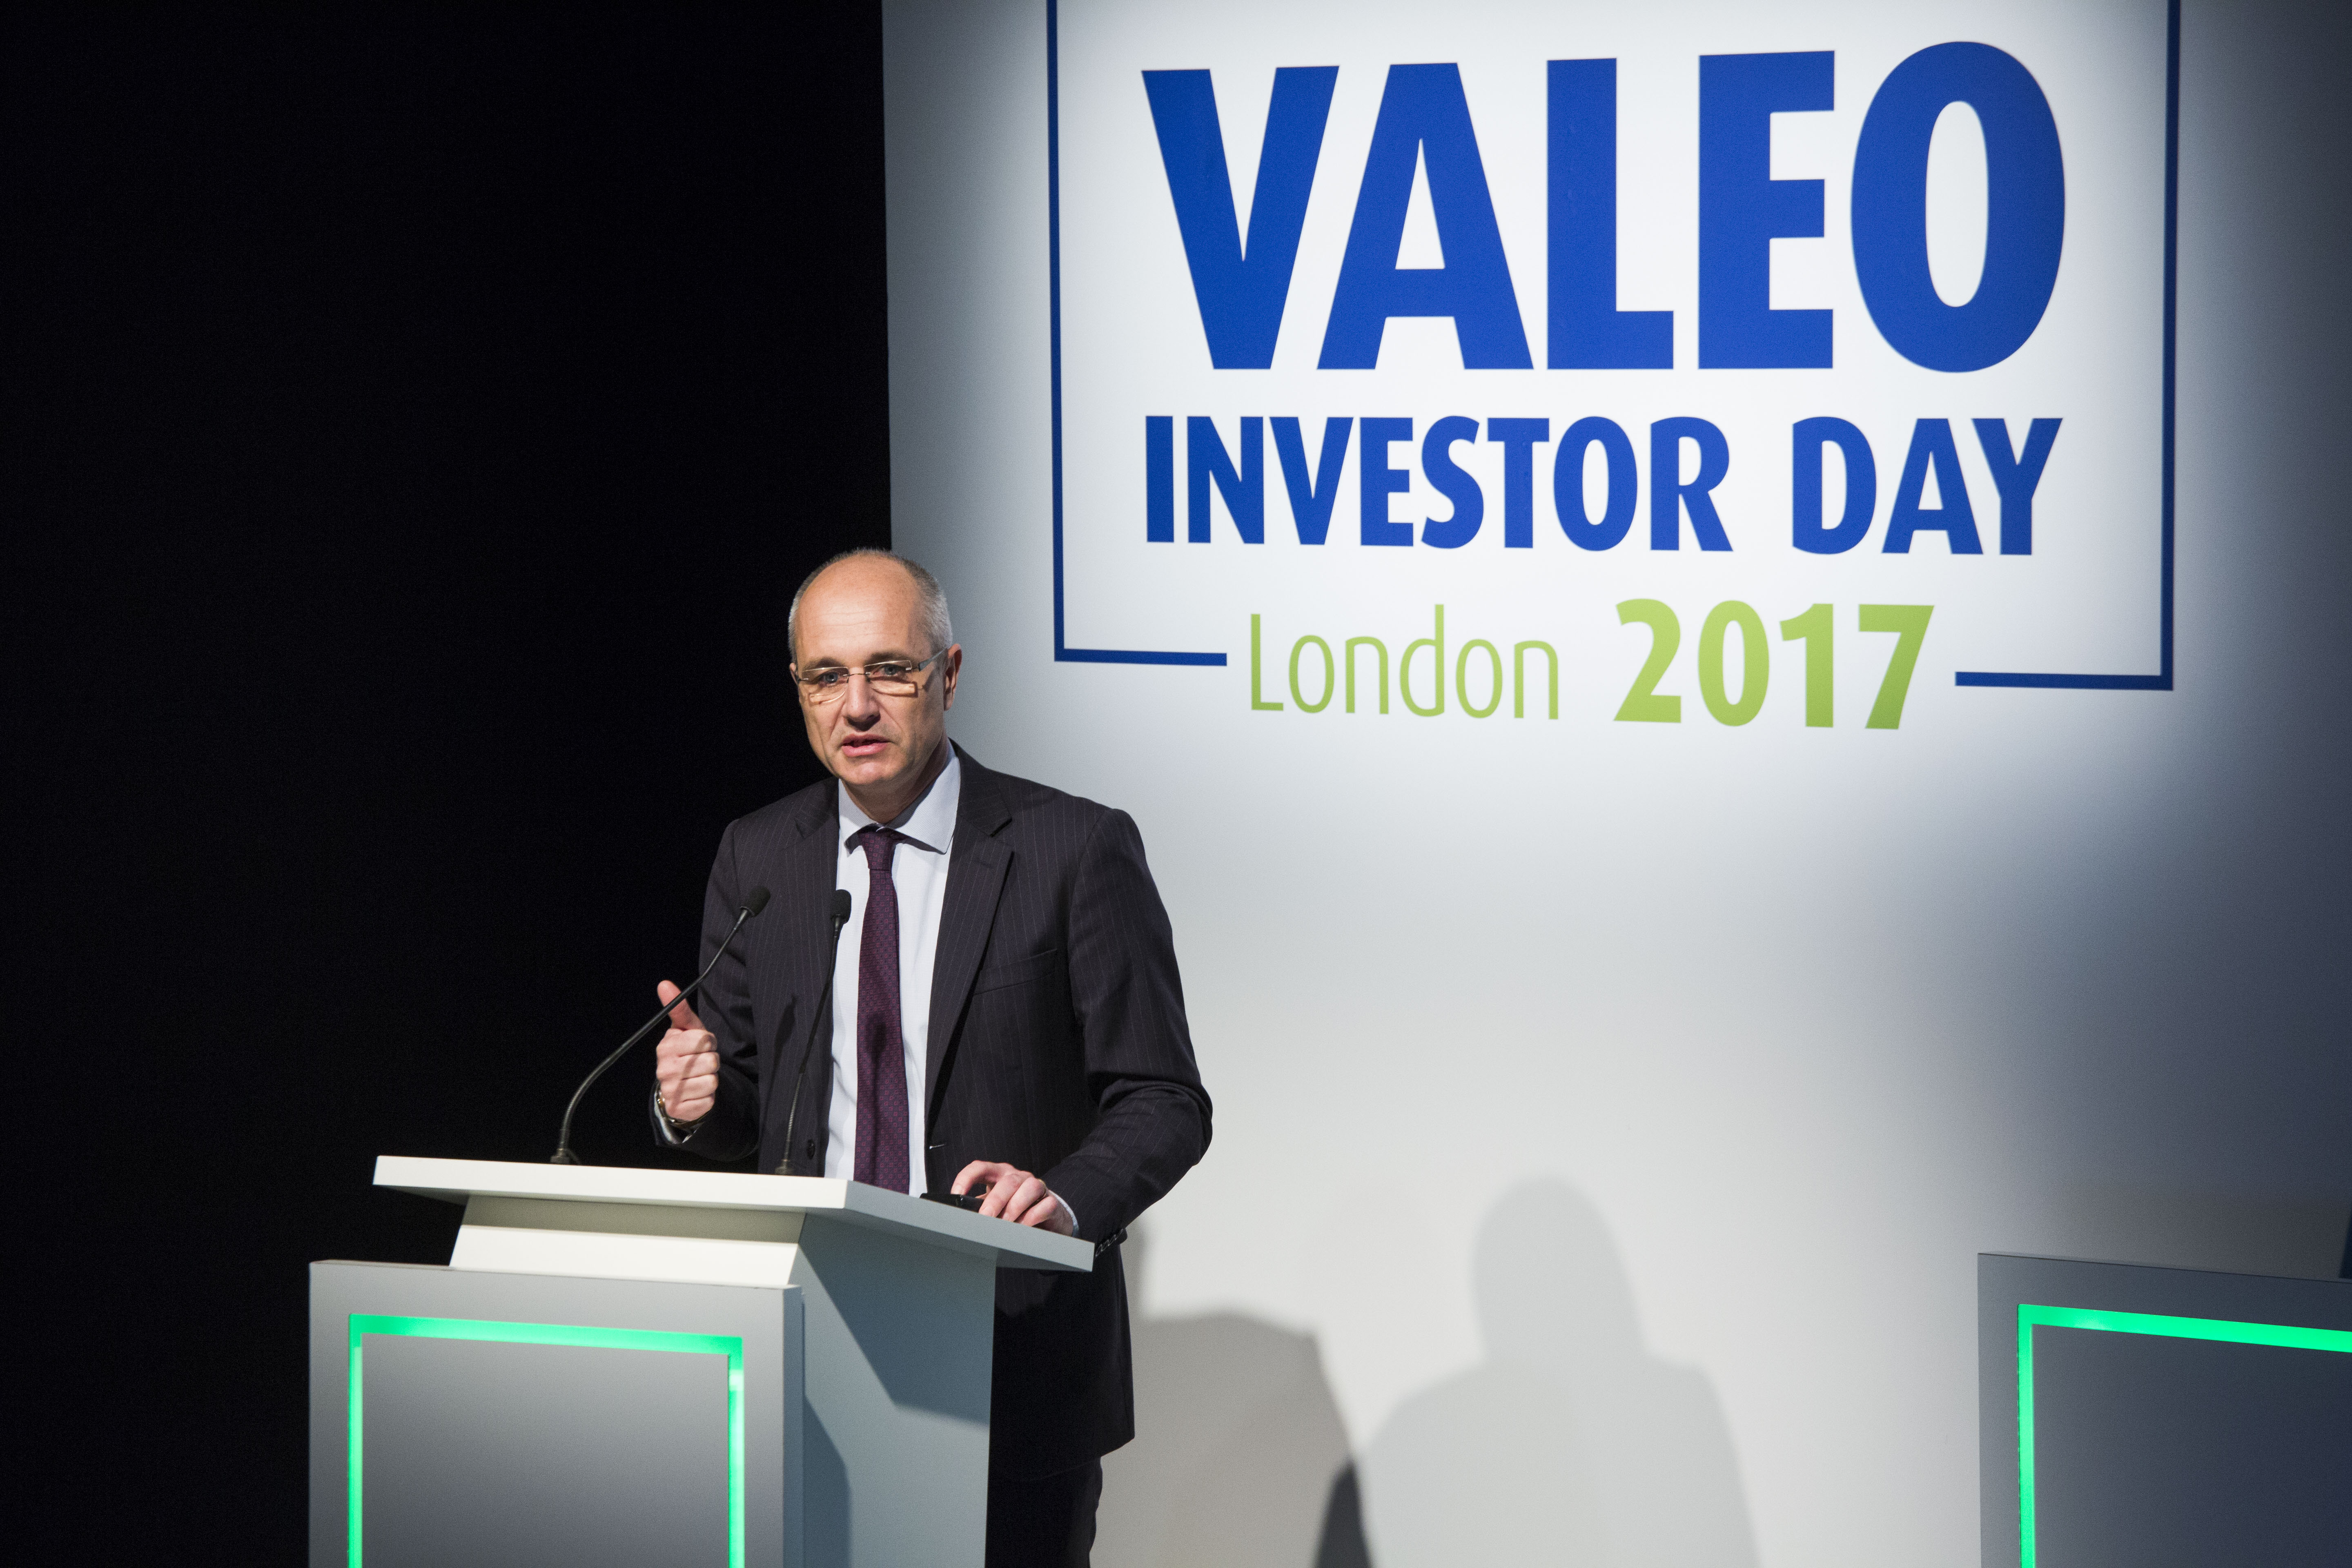 Christophe Perillat giving a speech at Valeo Investor Day 2017 in London